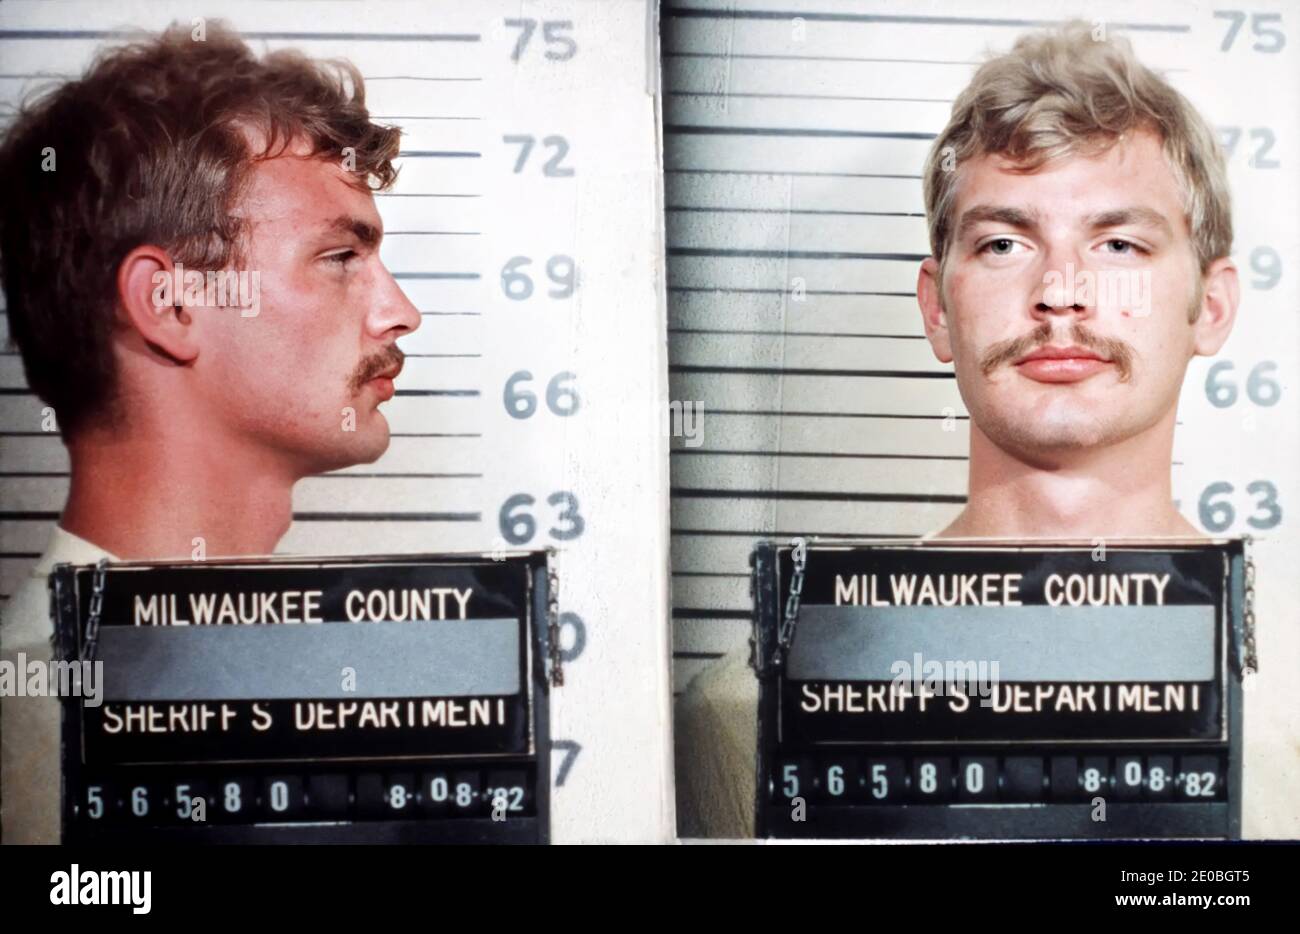 1982 , Milwaukee , USA : JEFFREY DAHMER aka the MILWAUKEE CANNIBAL ( 1960 - 1994 ) when was arrested  in a photobooth of Police Department the day 8 august 1982 . Dahmer was an American spree killer who murdered at least 17 people , from 1978 to 1991 . - SERIAL KILLER - Mostro di Milwaukee - The Monster of - portrait - ritratto - serial-killer - assassino seriale - CRONACA NERA - criminale - criminal - SERIAL KILLER  - GAY - LGBT - CANNIBALE - cannibalismo - omosessuale - omosessualità - homosexuality - homosexual - foto segnaletica della Polizia - photo booth --- Archivio GBB Stock Photo